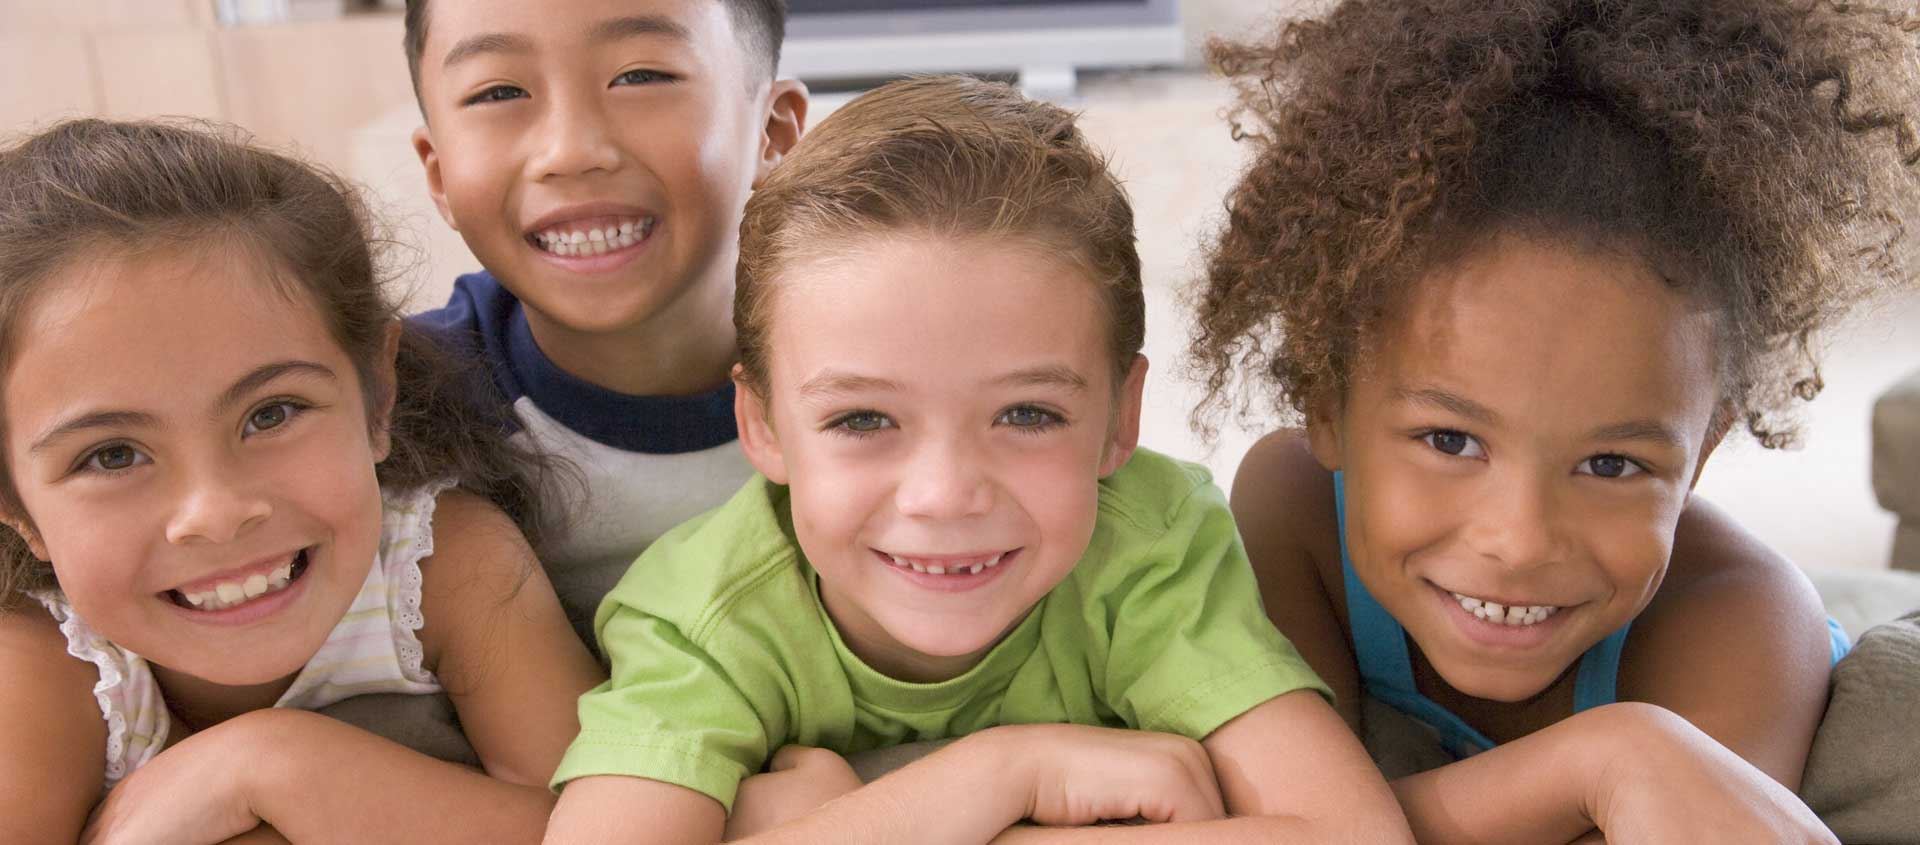 A diverse group of children smile for the camera